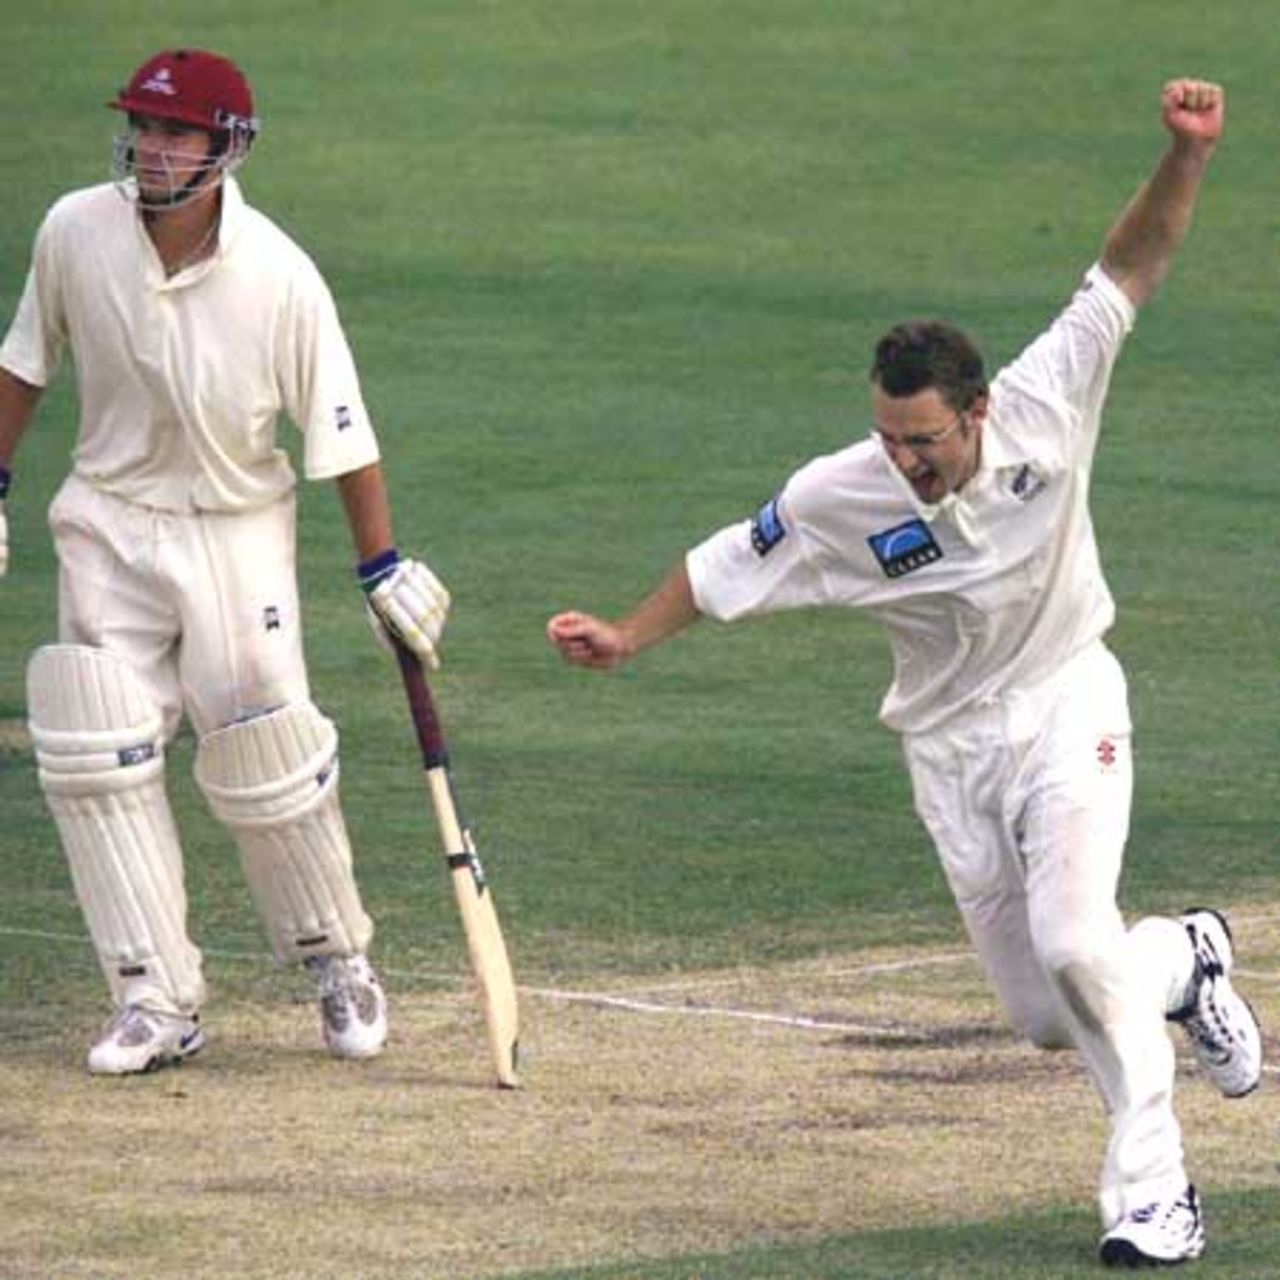 18 Oct 2001: Daniel Vettori of New Zealand celebrates a wicket during the match between New Zealand and the Queensland XI played at the Allan Border Field, Brisbane, Australia.